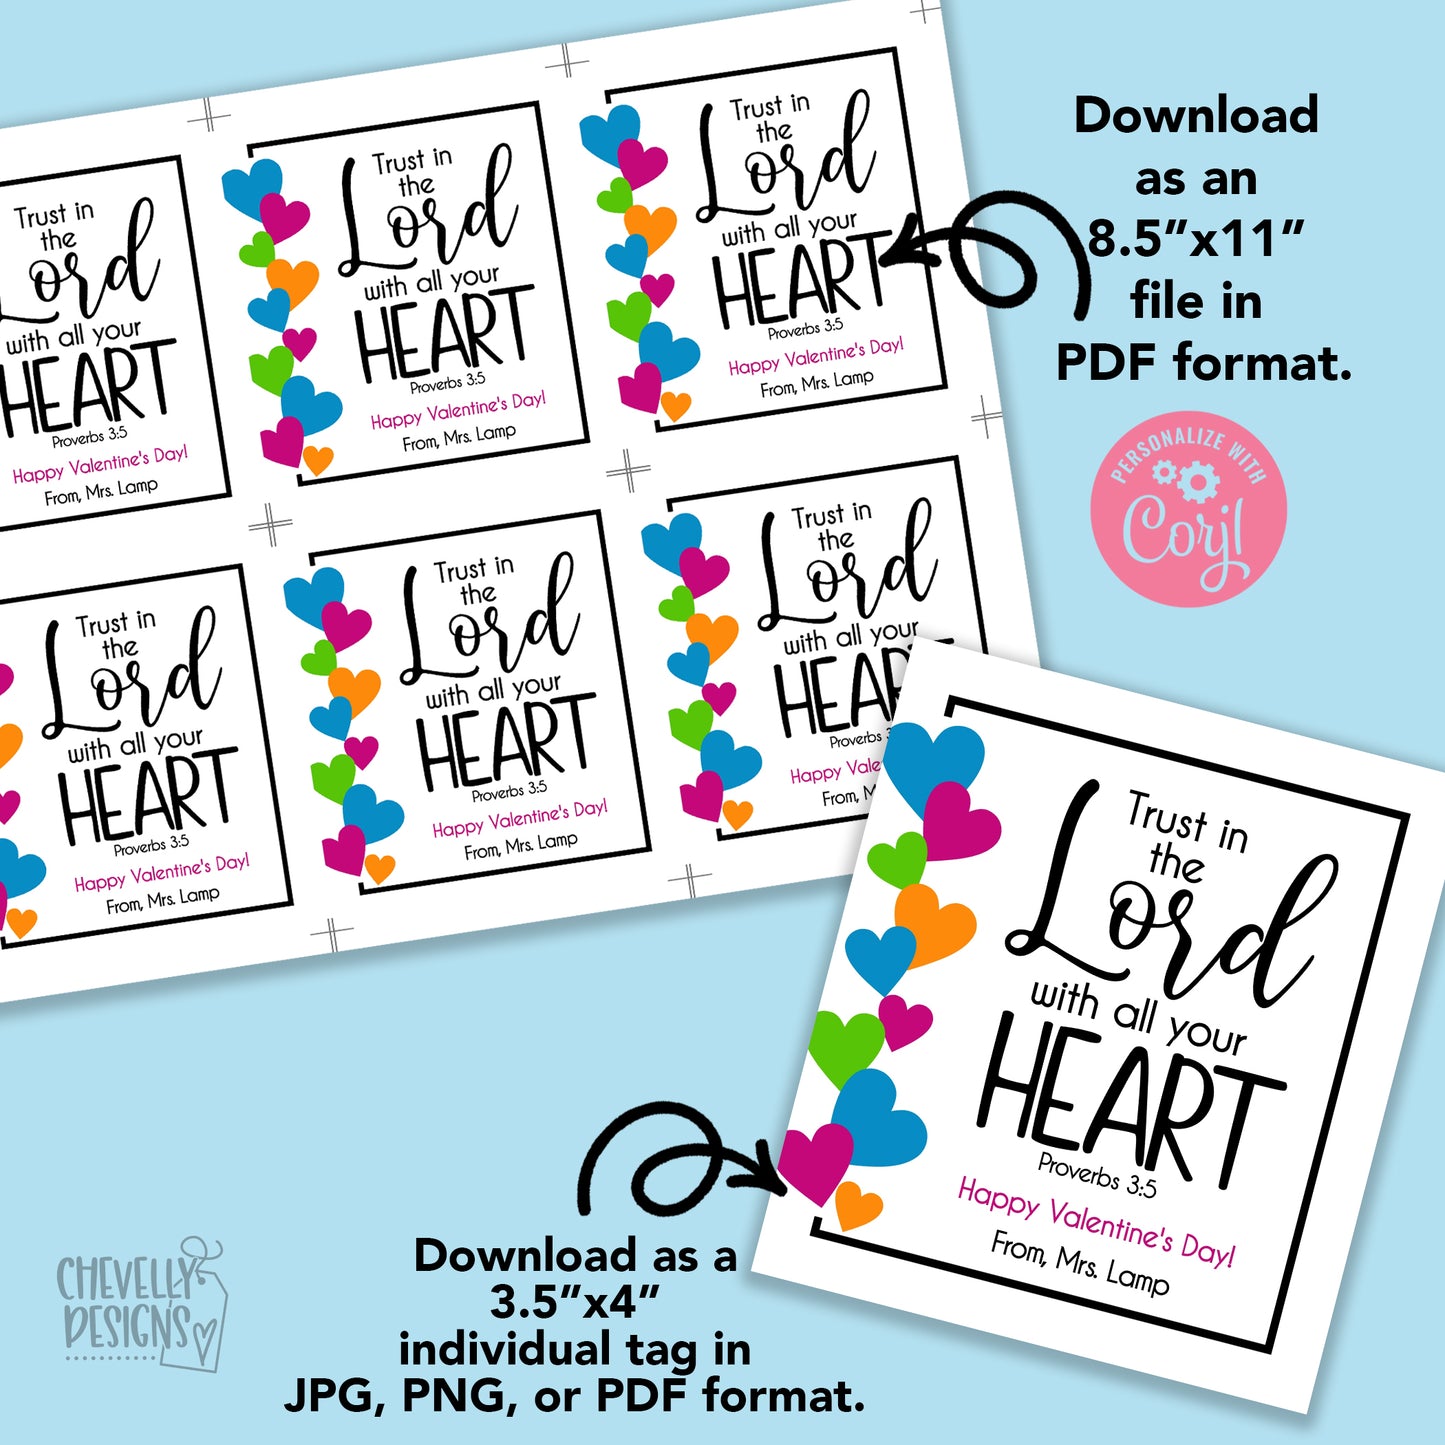 Editable - Trust in the Lord with all Your Heart - Proverbs 3:5 Valentine Cards - Printable Digital File